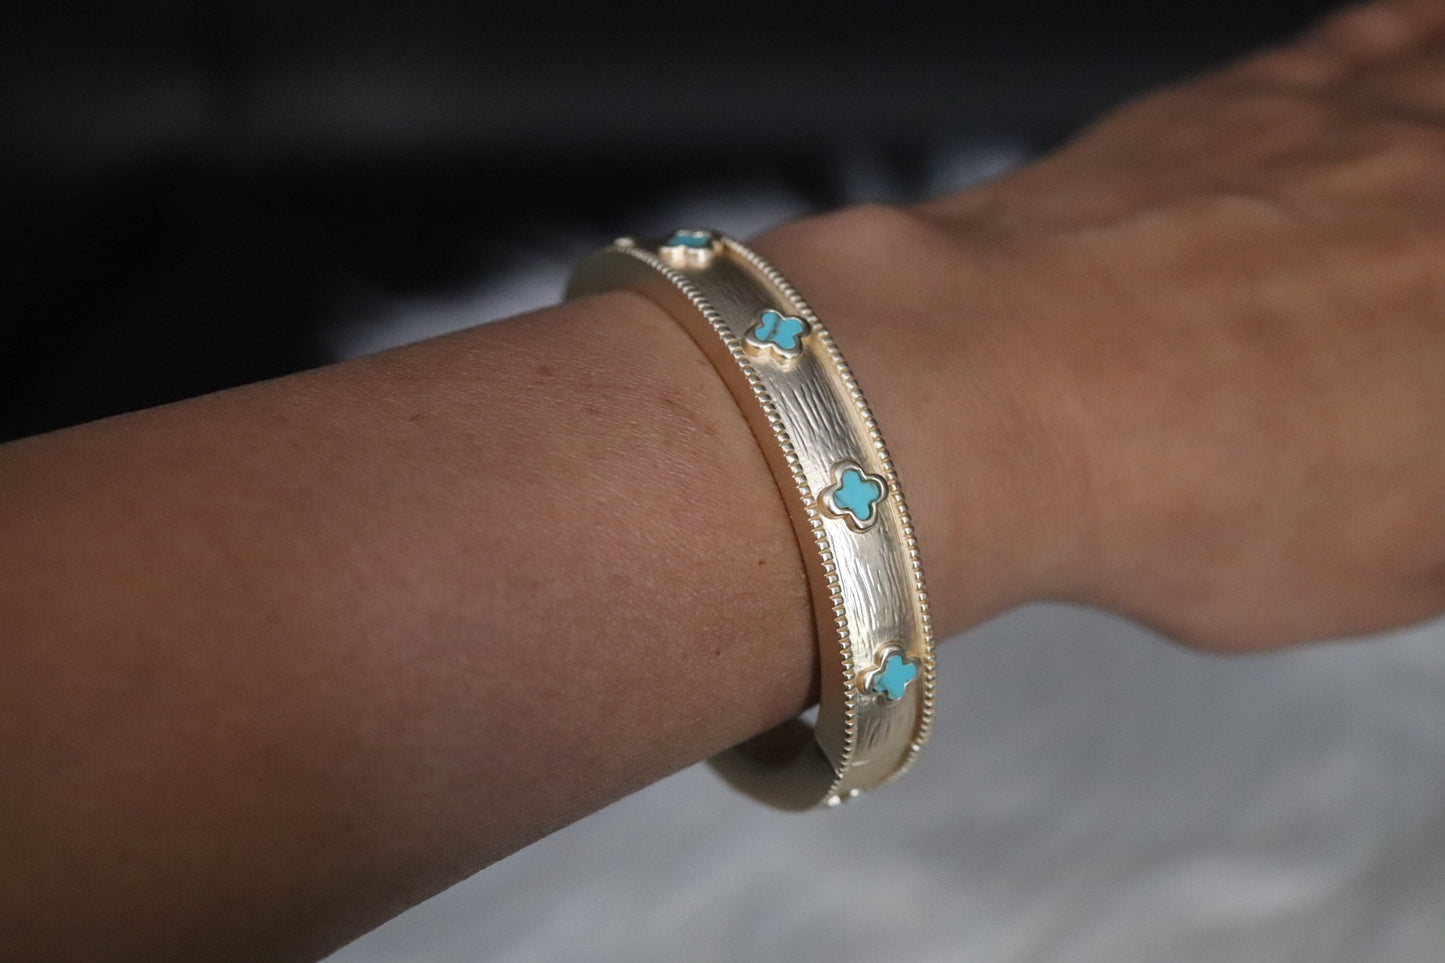 Matte Clover Bangle With Turquoise Clover Stations